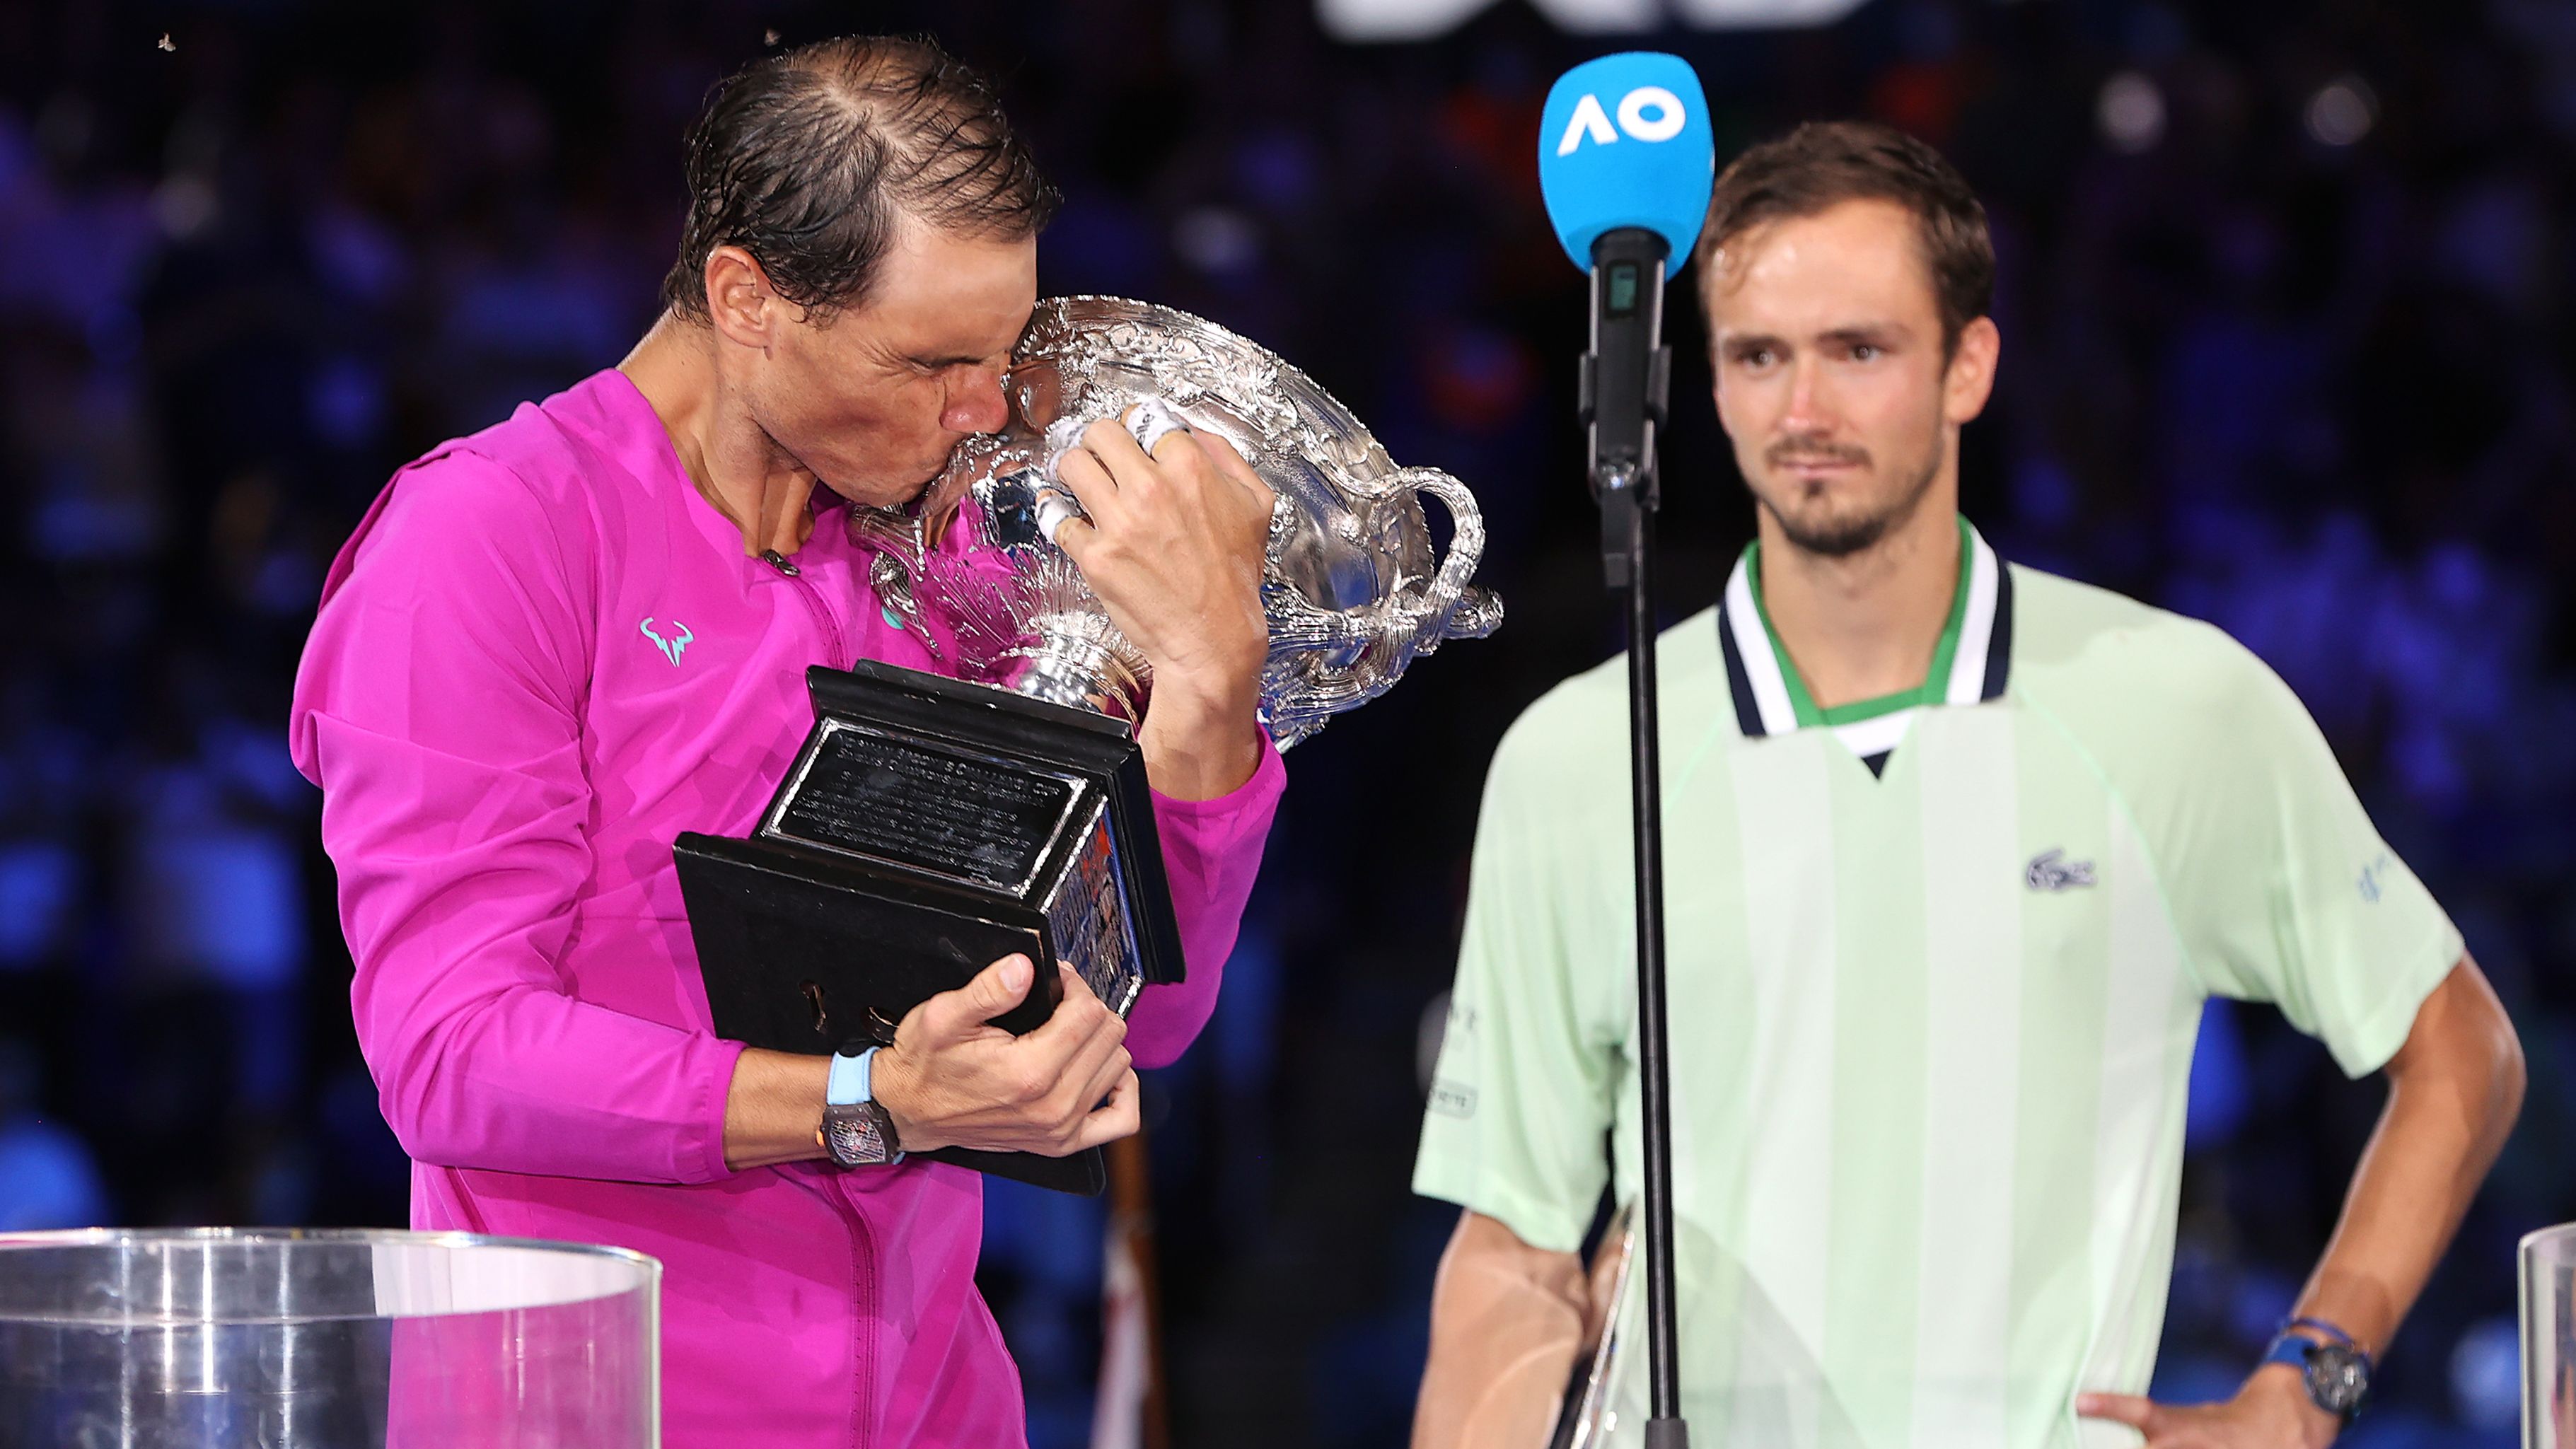 'The kid stopped dreaming': Daniil Medvedev's bizarre press conference monologue after loss to Rafael Nadal